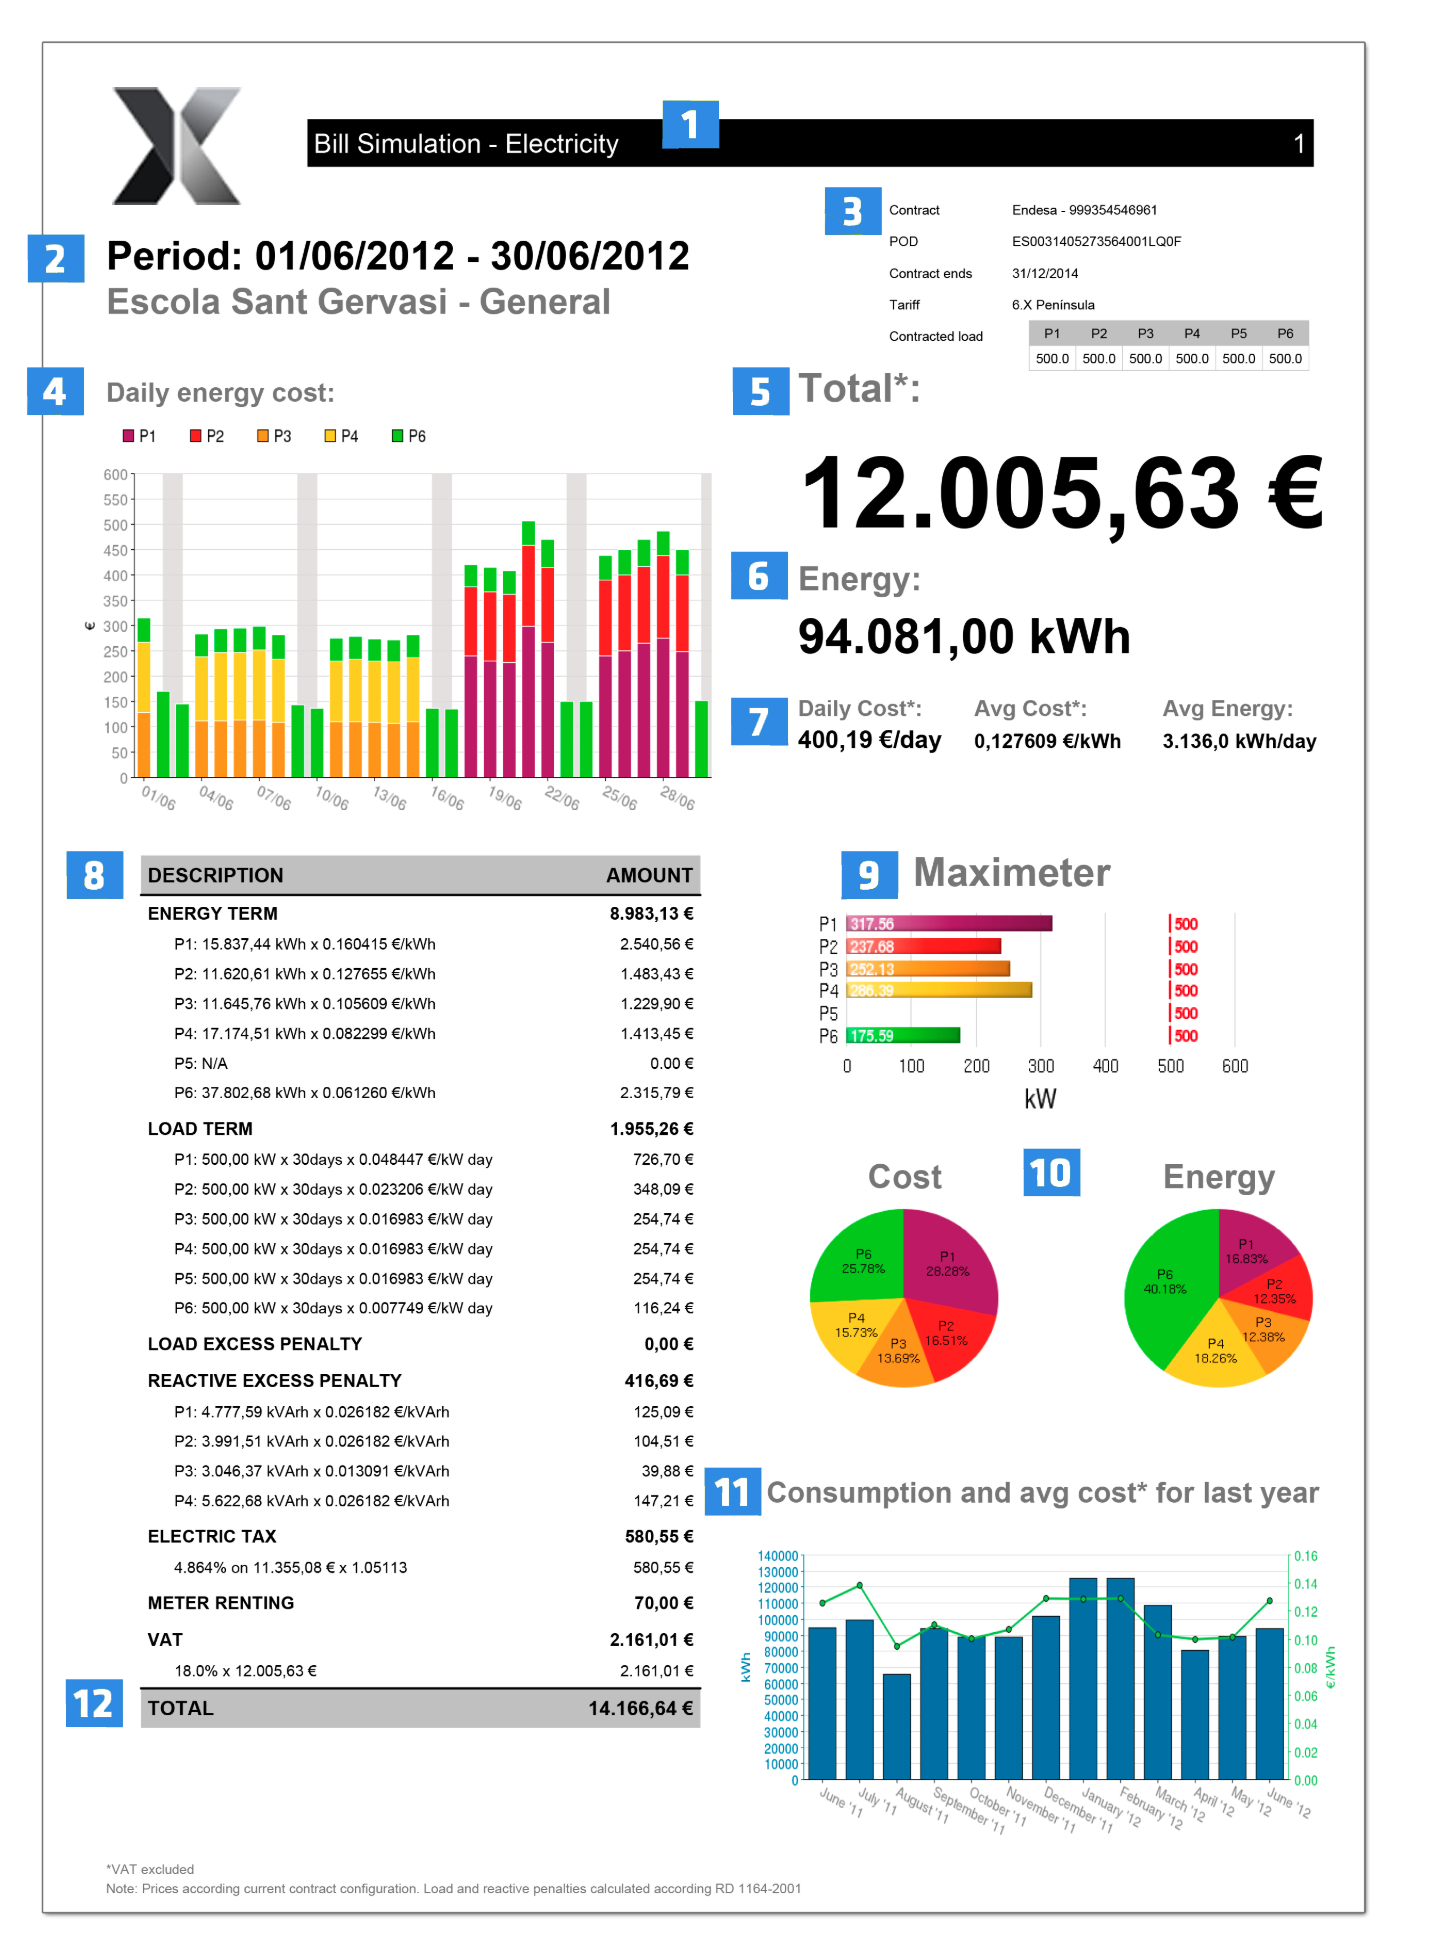 dexma-electricity-bill-simulation-report-1.png